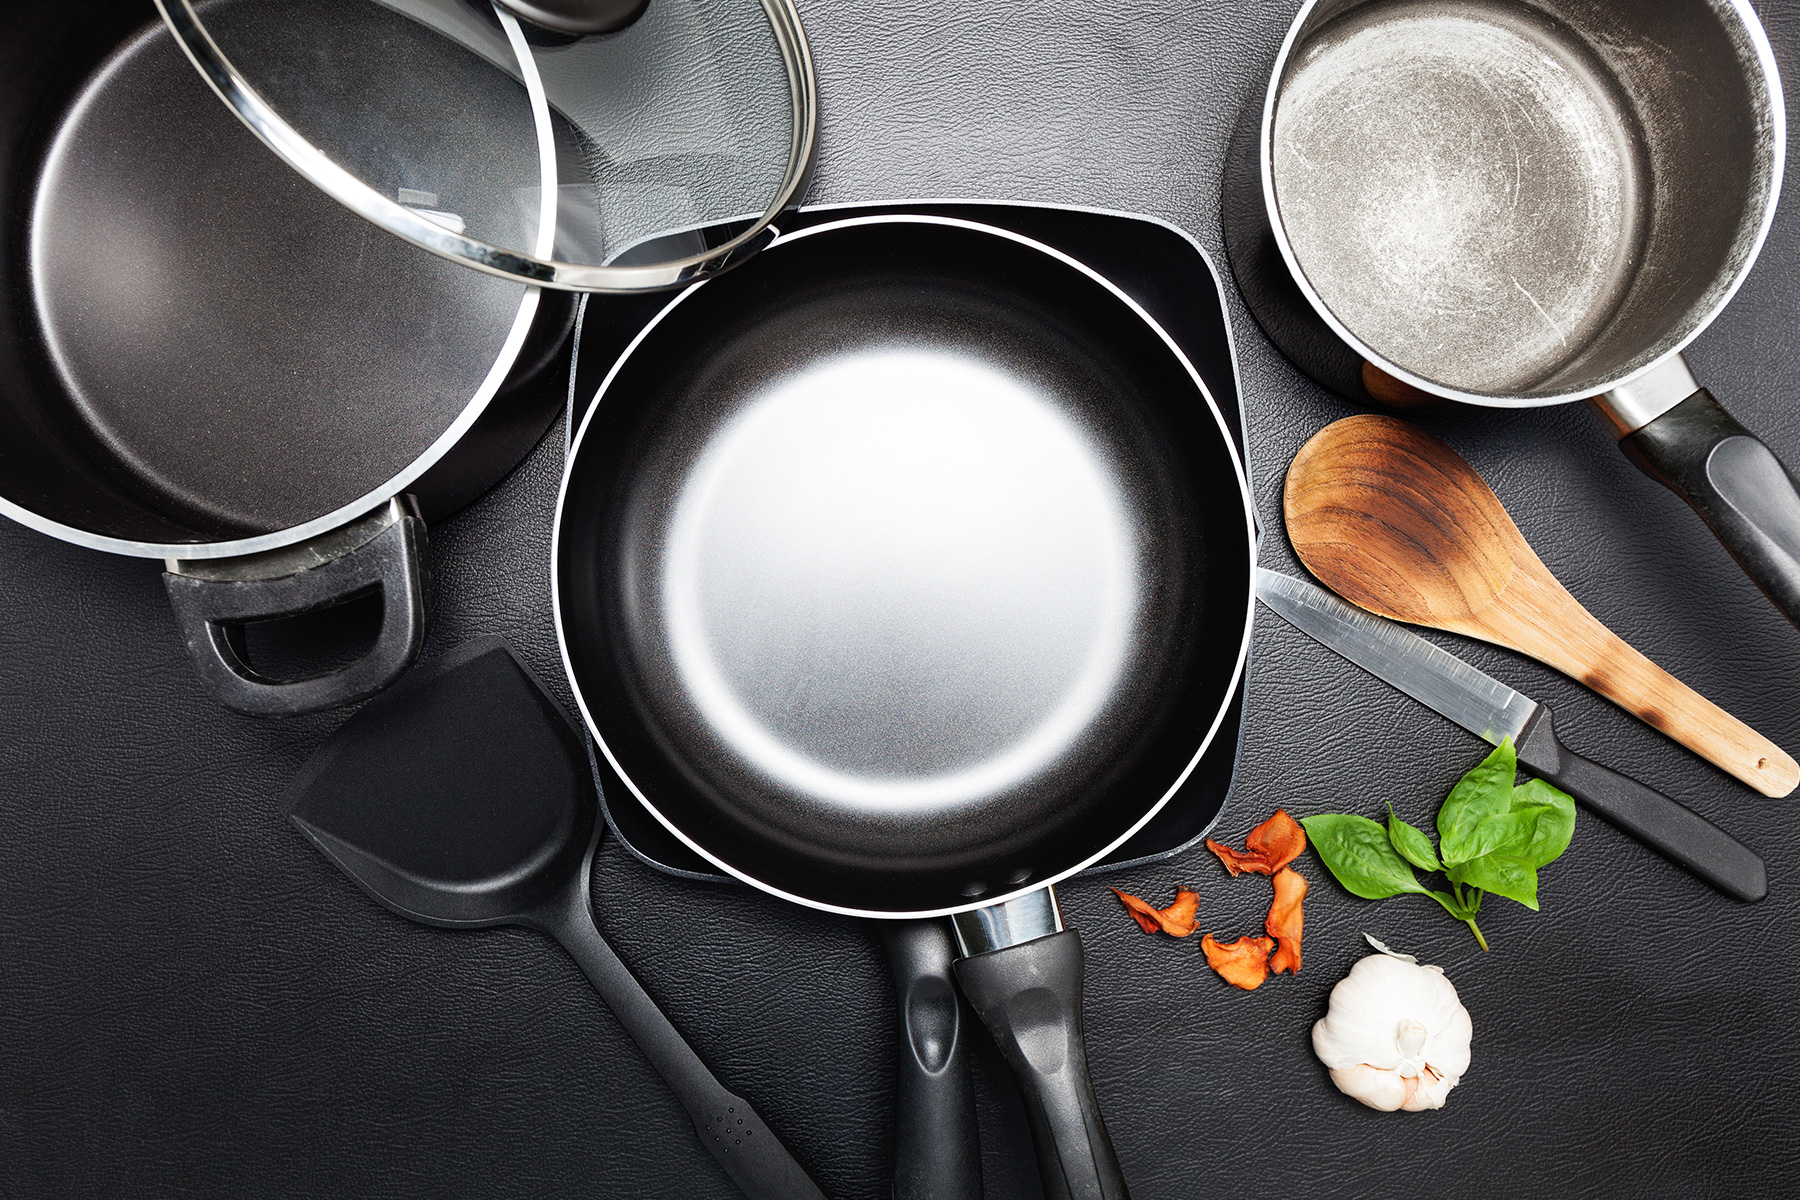 https://www.samtell.com/hubfs/Blogs/SamTell-Blog-Chef%27s-Guide-to-Commercial-Grade-Professional-Cookware.jpg#keepProtocol